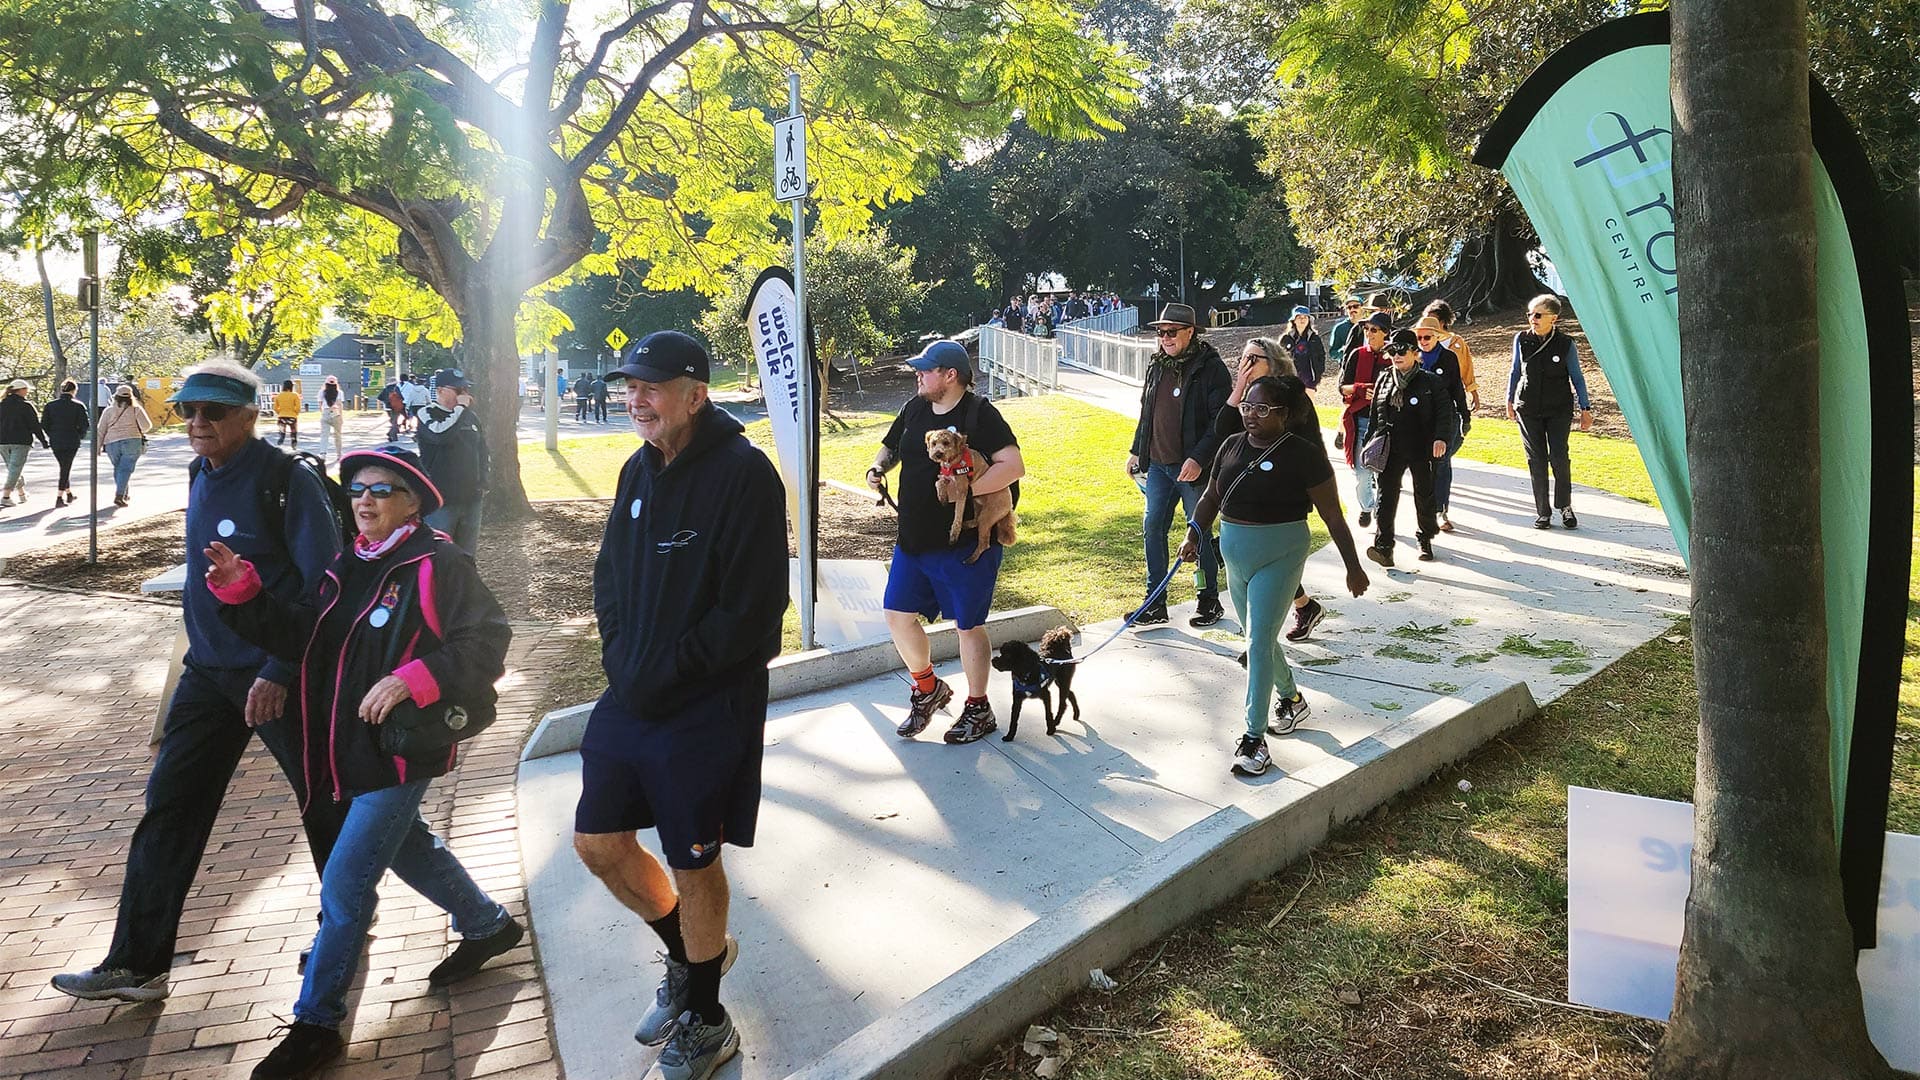 Participants entering the Welcome Walk from Davies Park in West End, Brisbane.